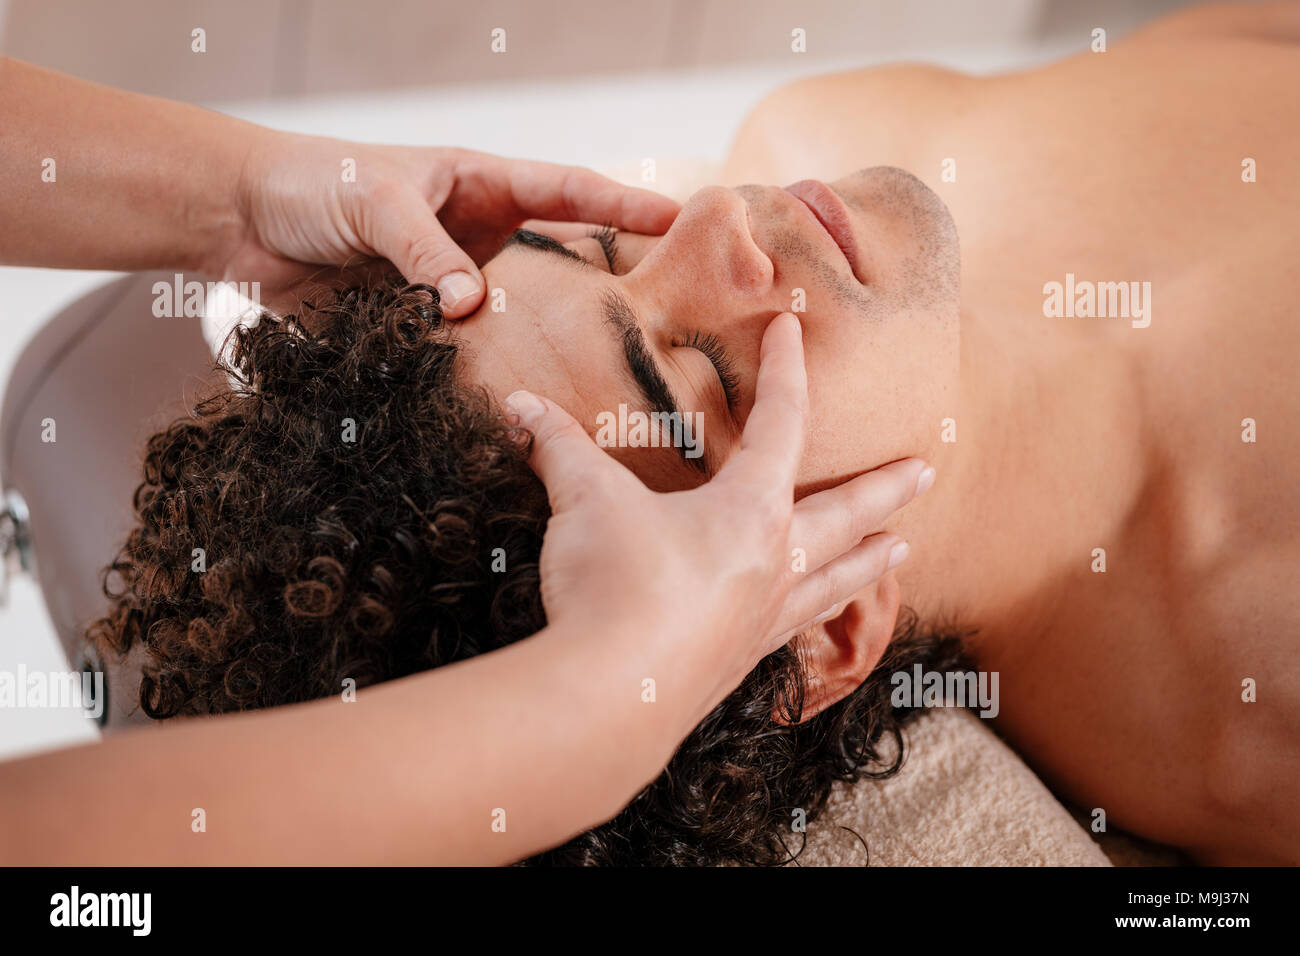 Close-up of a handsome healthy young man enjoying relaxing facial massage at beauty salon. Stock Photo